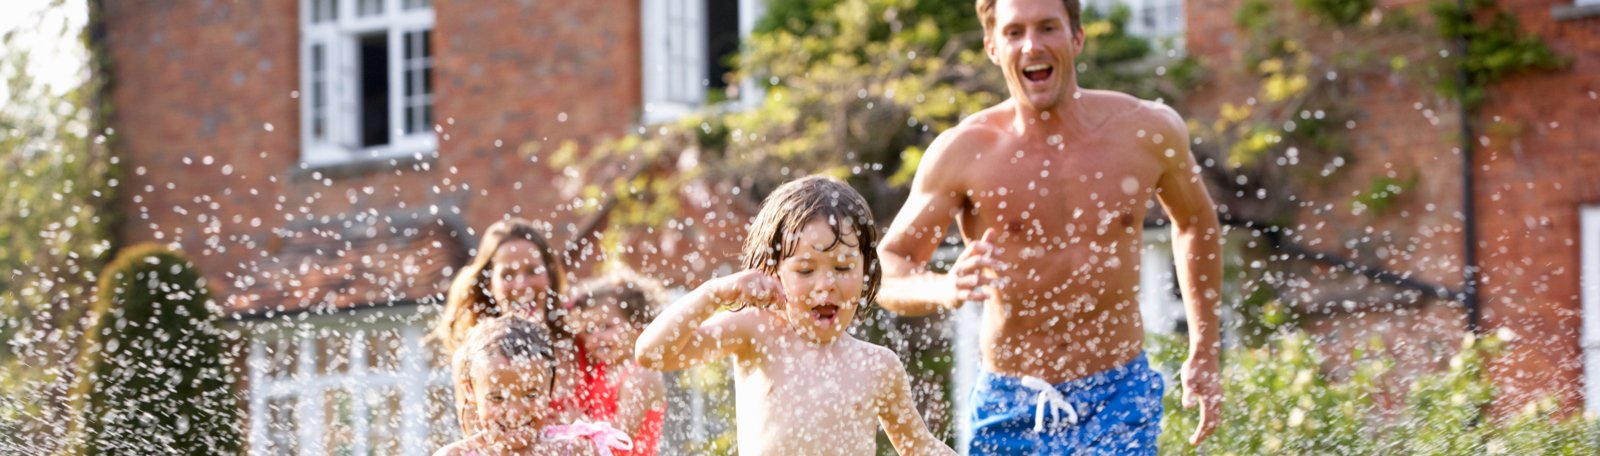 How to keep cool, calm & carry on during a heatwave